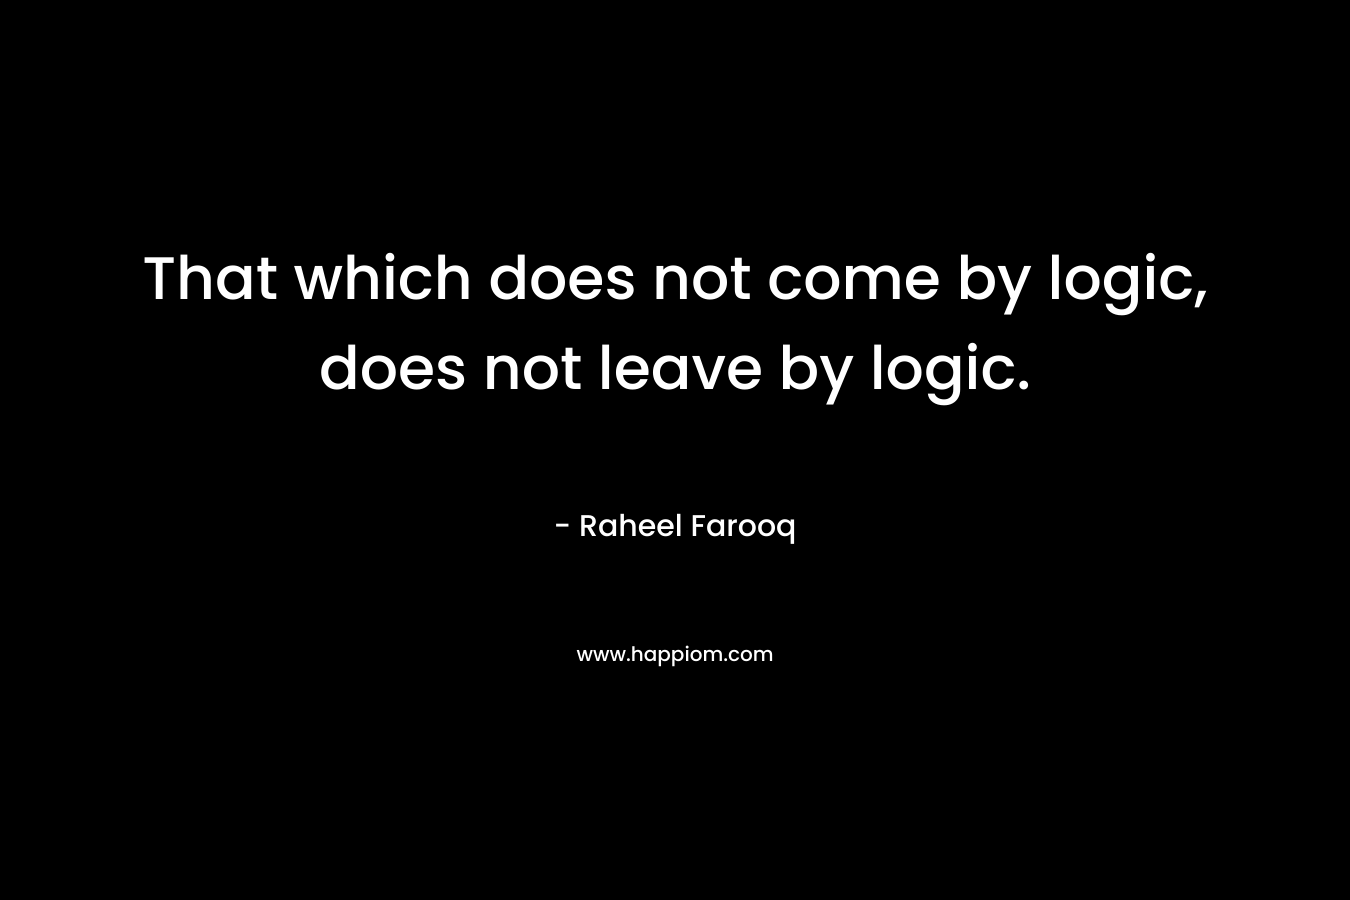 That which does not come by logic, does not leave by logic.